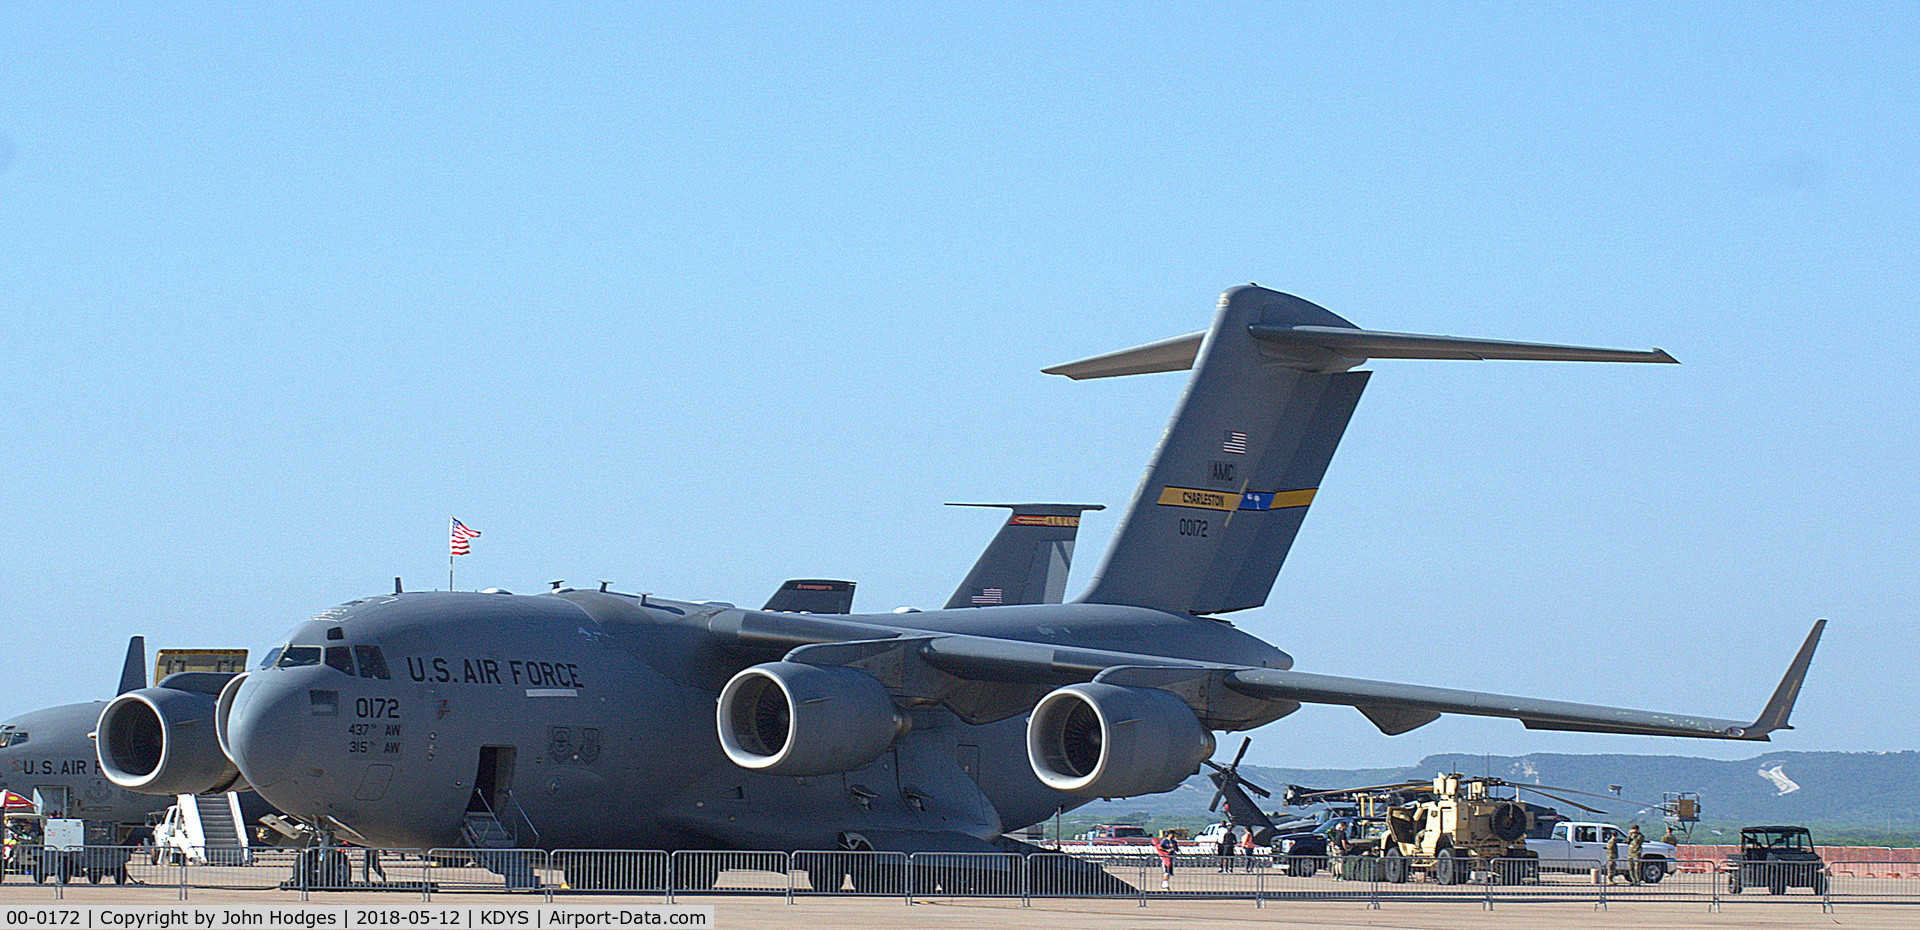 00-0172, 2001 Boeing C-17A Globemaster III C/N P-72, At Dyess on static display